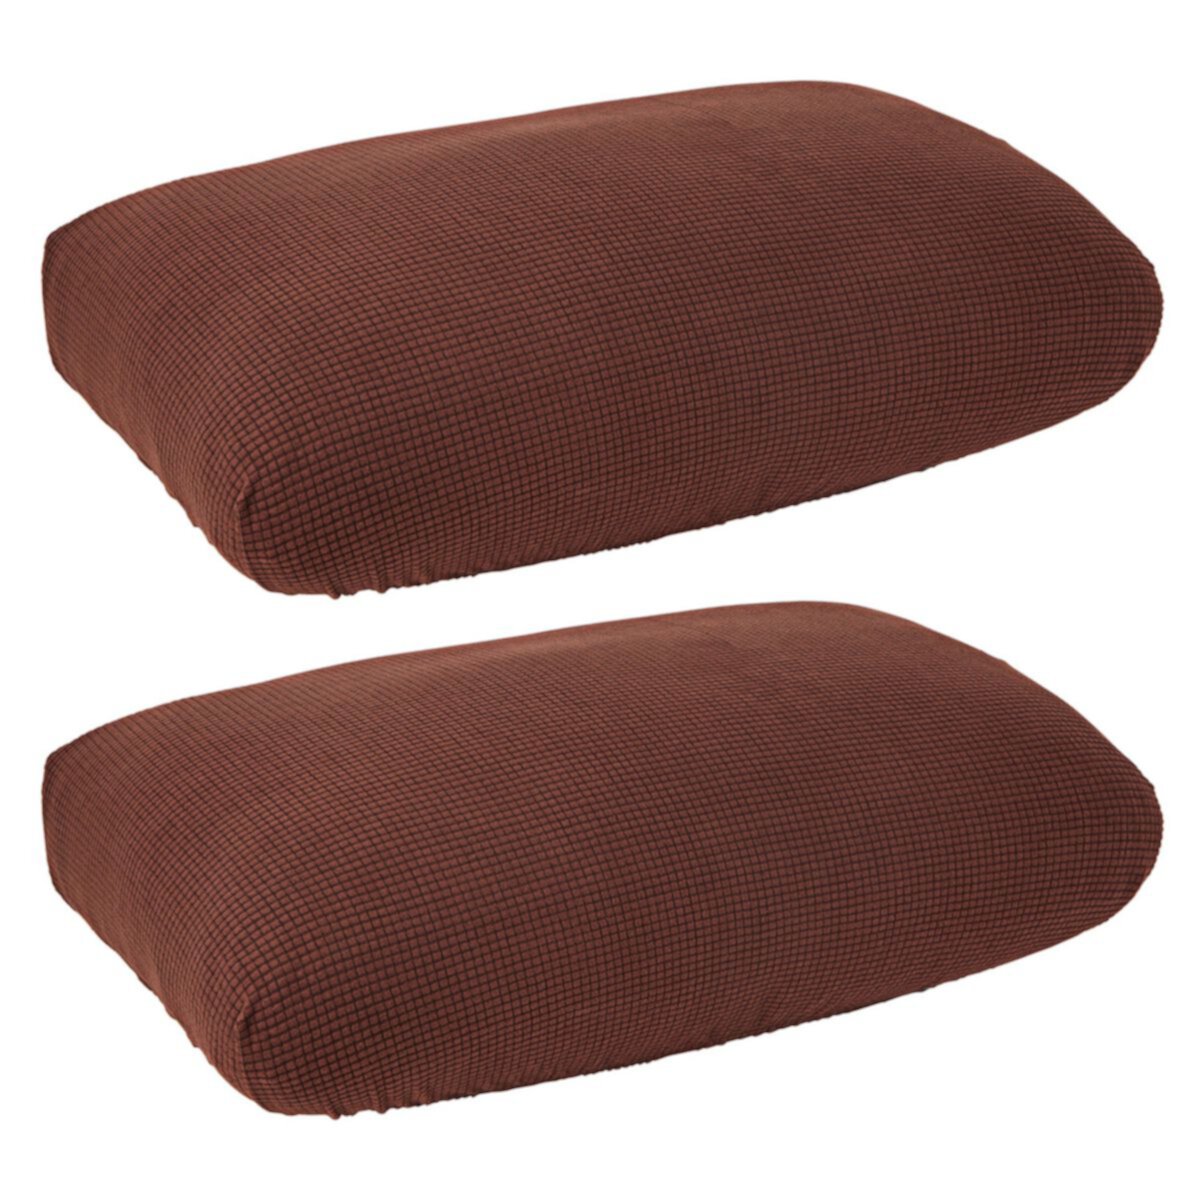 2 Pack Stretch Outdoor Cushion Covers for Patio Furniture and Sofas, Reversible (Medium, Dark Brown) Juvale